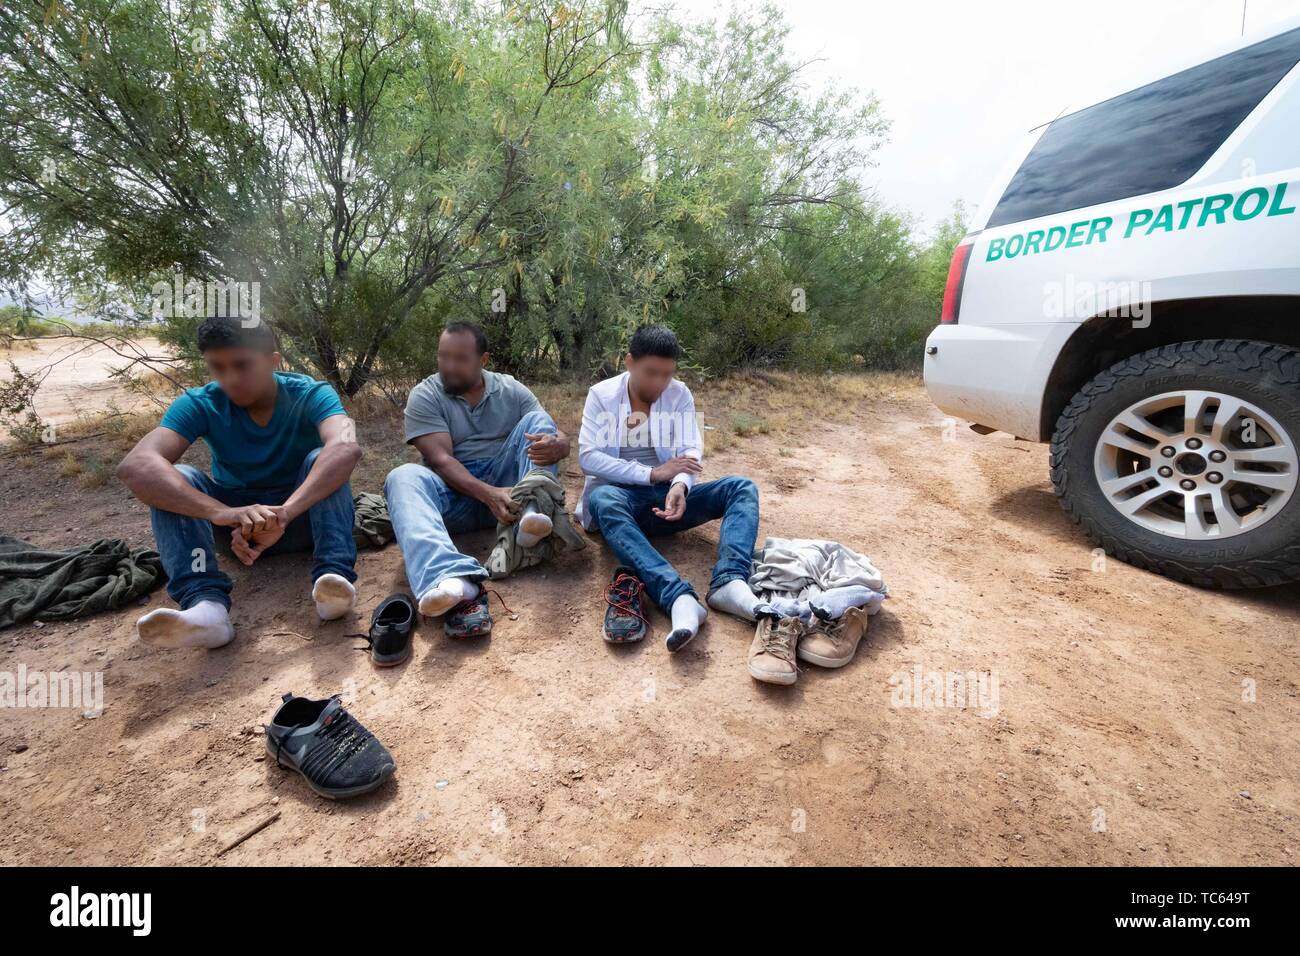 U.S. Border Patrol agents detain a group of illegal migrants after they crossed from Mexico on the Tohono Oʼodham Indian Reservation May 22, 2019 near Pisinemo, Arizona. The faces are obscured by the Border Patrol to protect their identity. Stock Photo